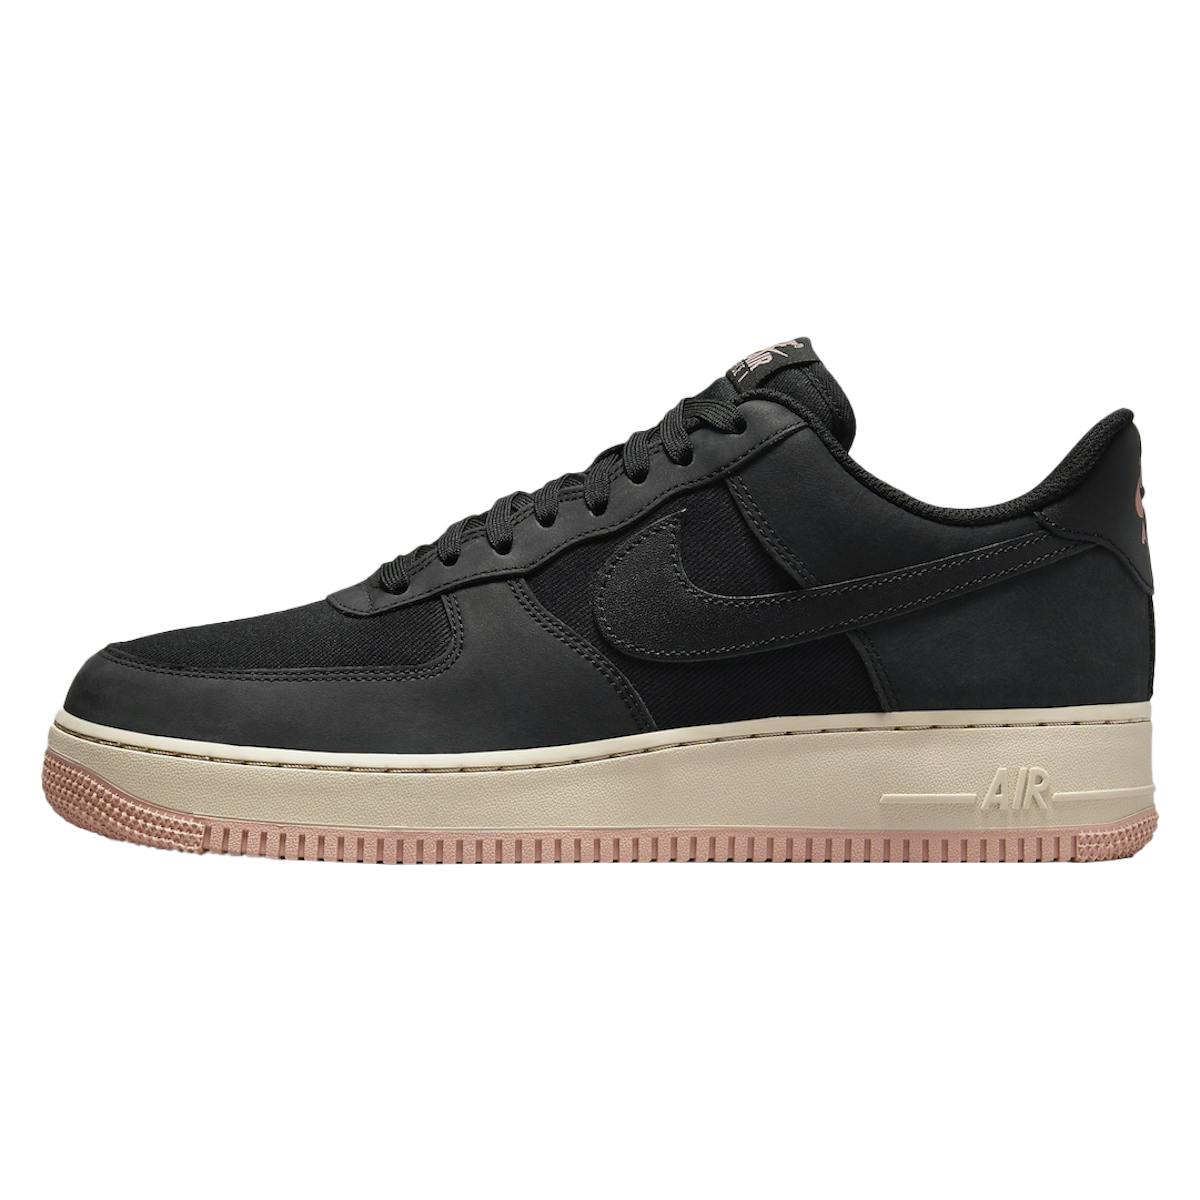 Nike Air Force 1 Low LX "Black Red Stardust"